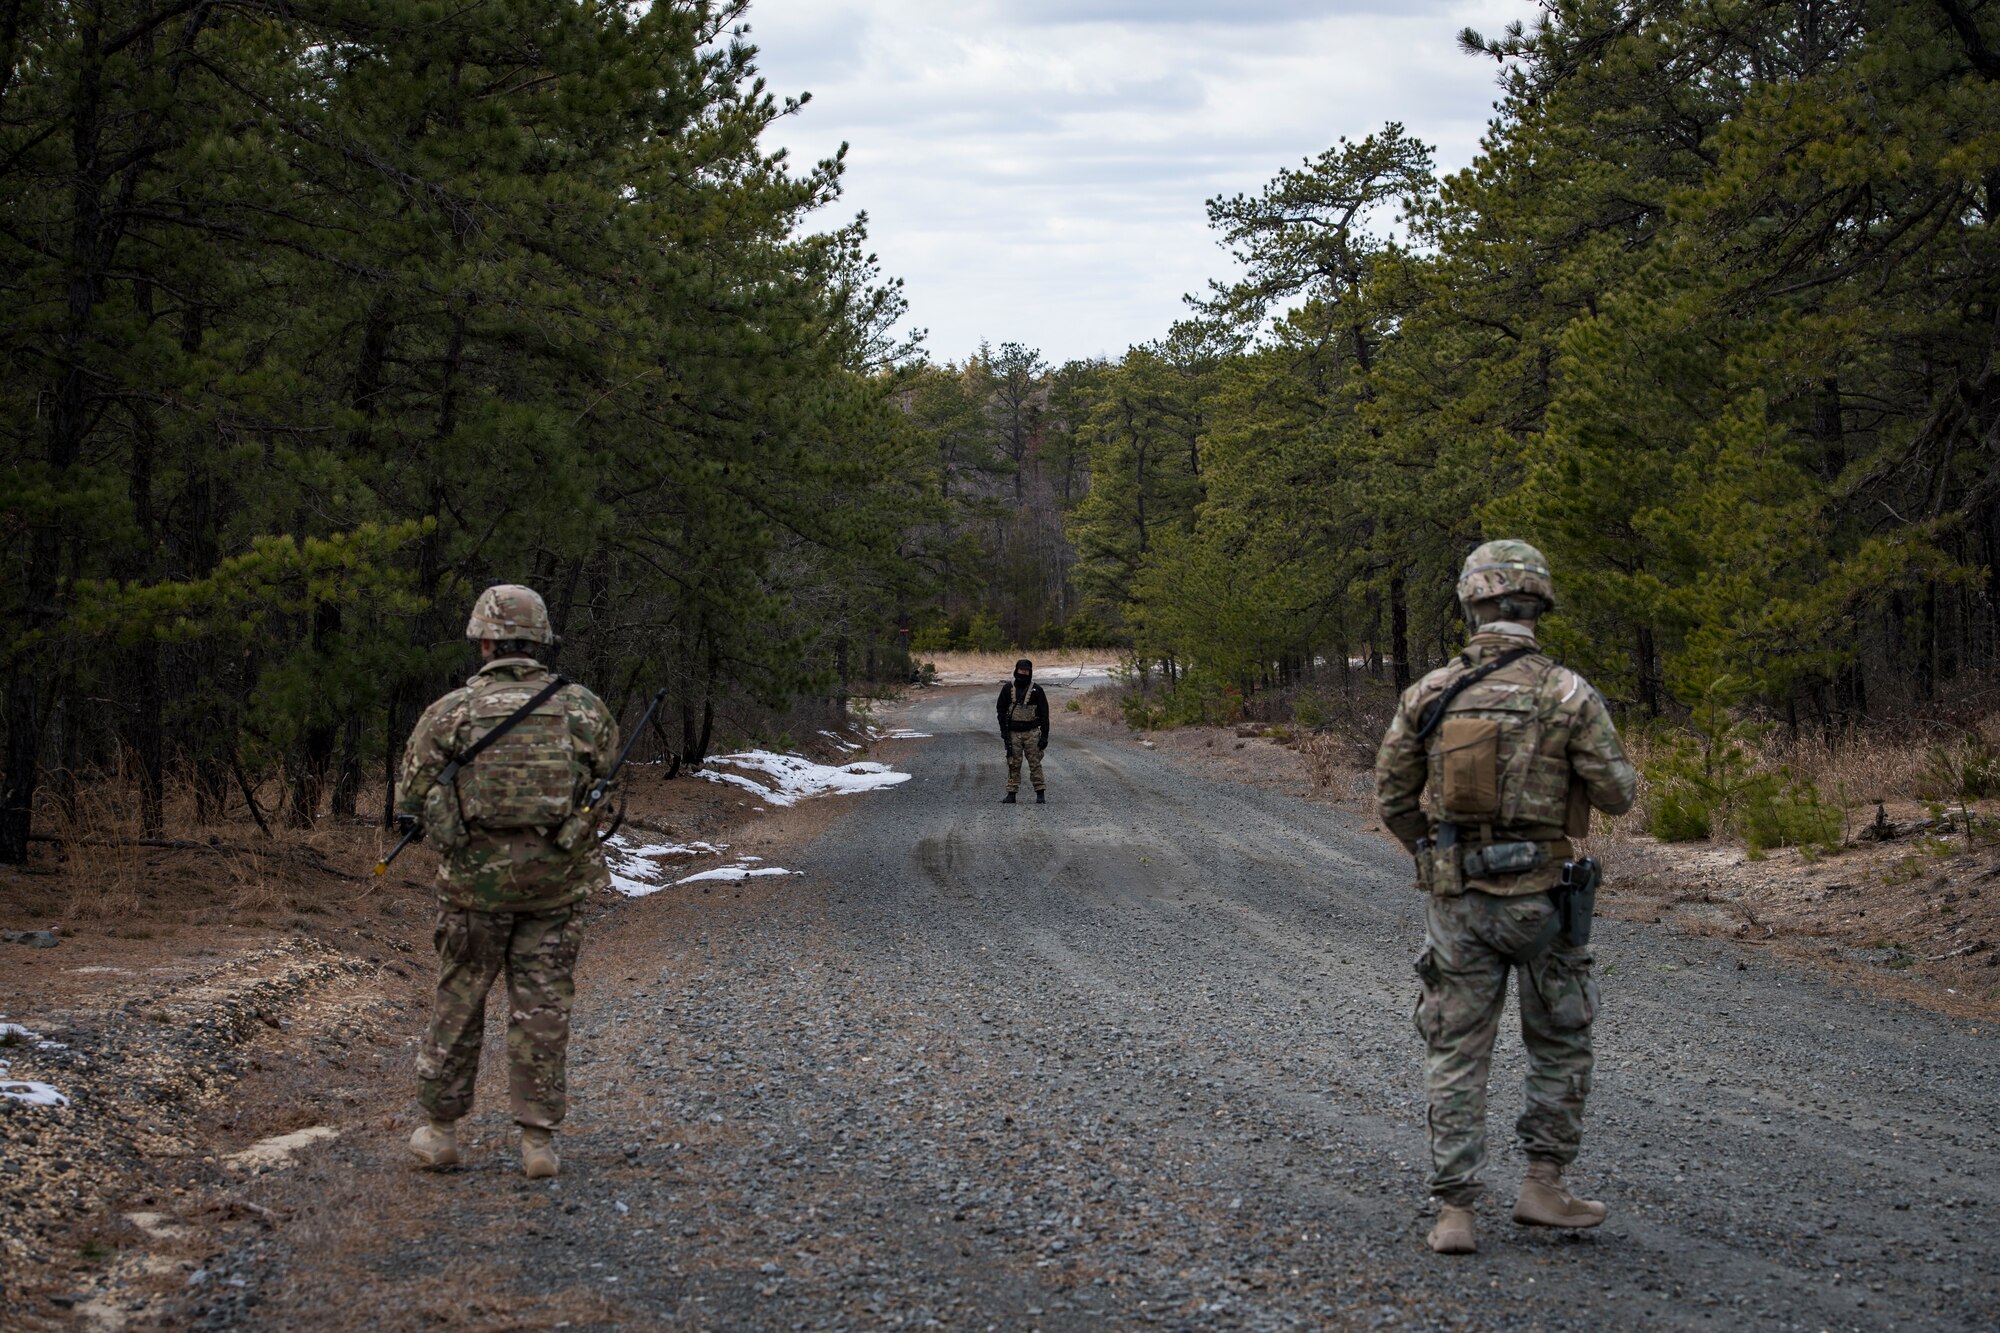 Airmen from the 824th Base Defense Squadron confront a possible threat during a Mission Readiness Exercise, March 16, 2018, at Joint Base McGuire-Dix Lakehurst, N.J. Evaluators tested the 824th BDS from Moody Air Force Base, Ga., and the 105th Security Forces Squadron from Stewart Air National Guard Base, N.Y., to ensure their combat readiness. (U.S. Air Force photo by Senior Airman Janiqua P. Robinson)